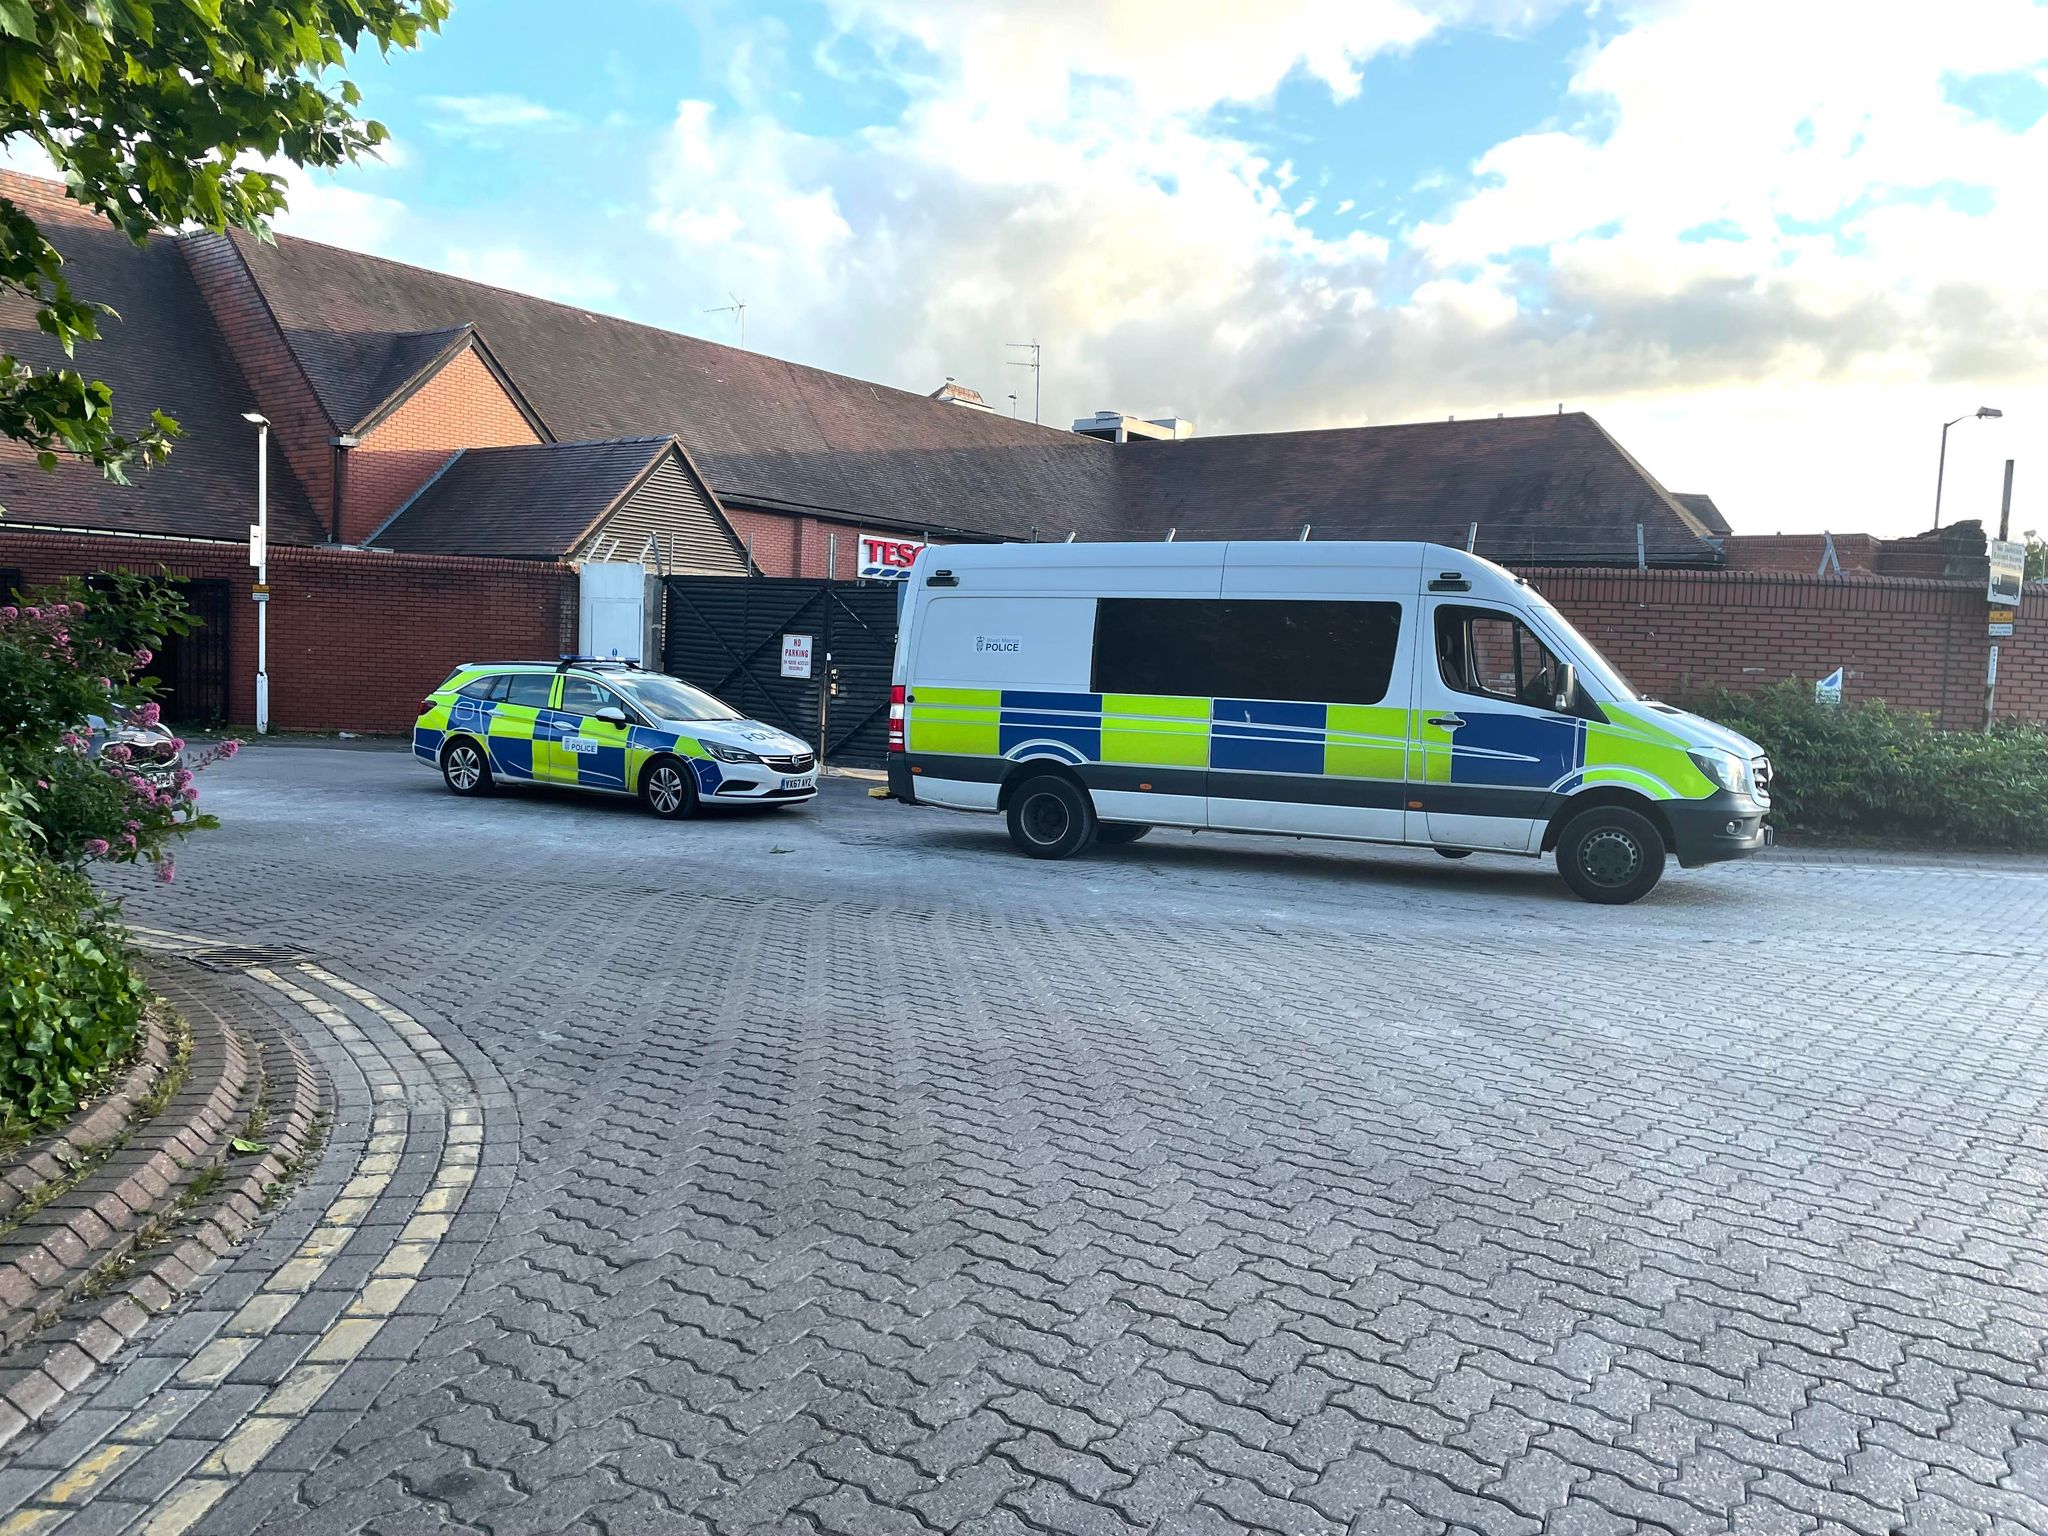 NEWS | West Mercia Police confirm man was brought to safety from roof of Debenhams building in Hereford